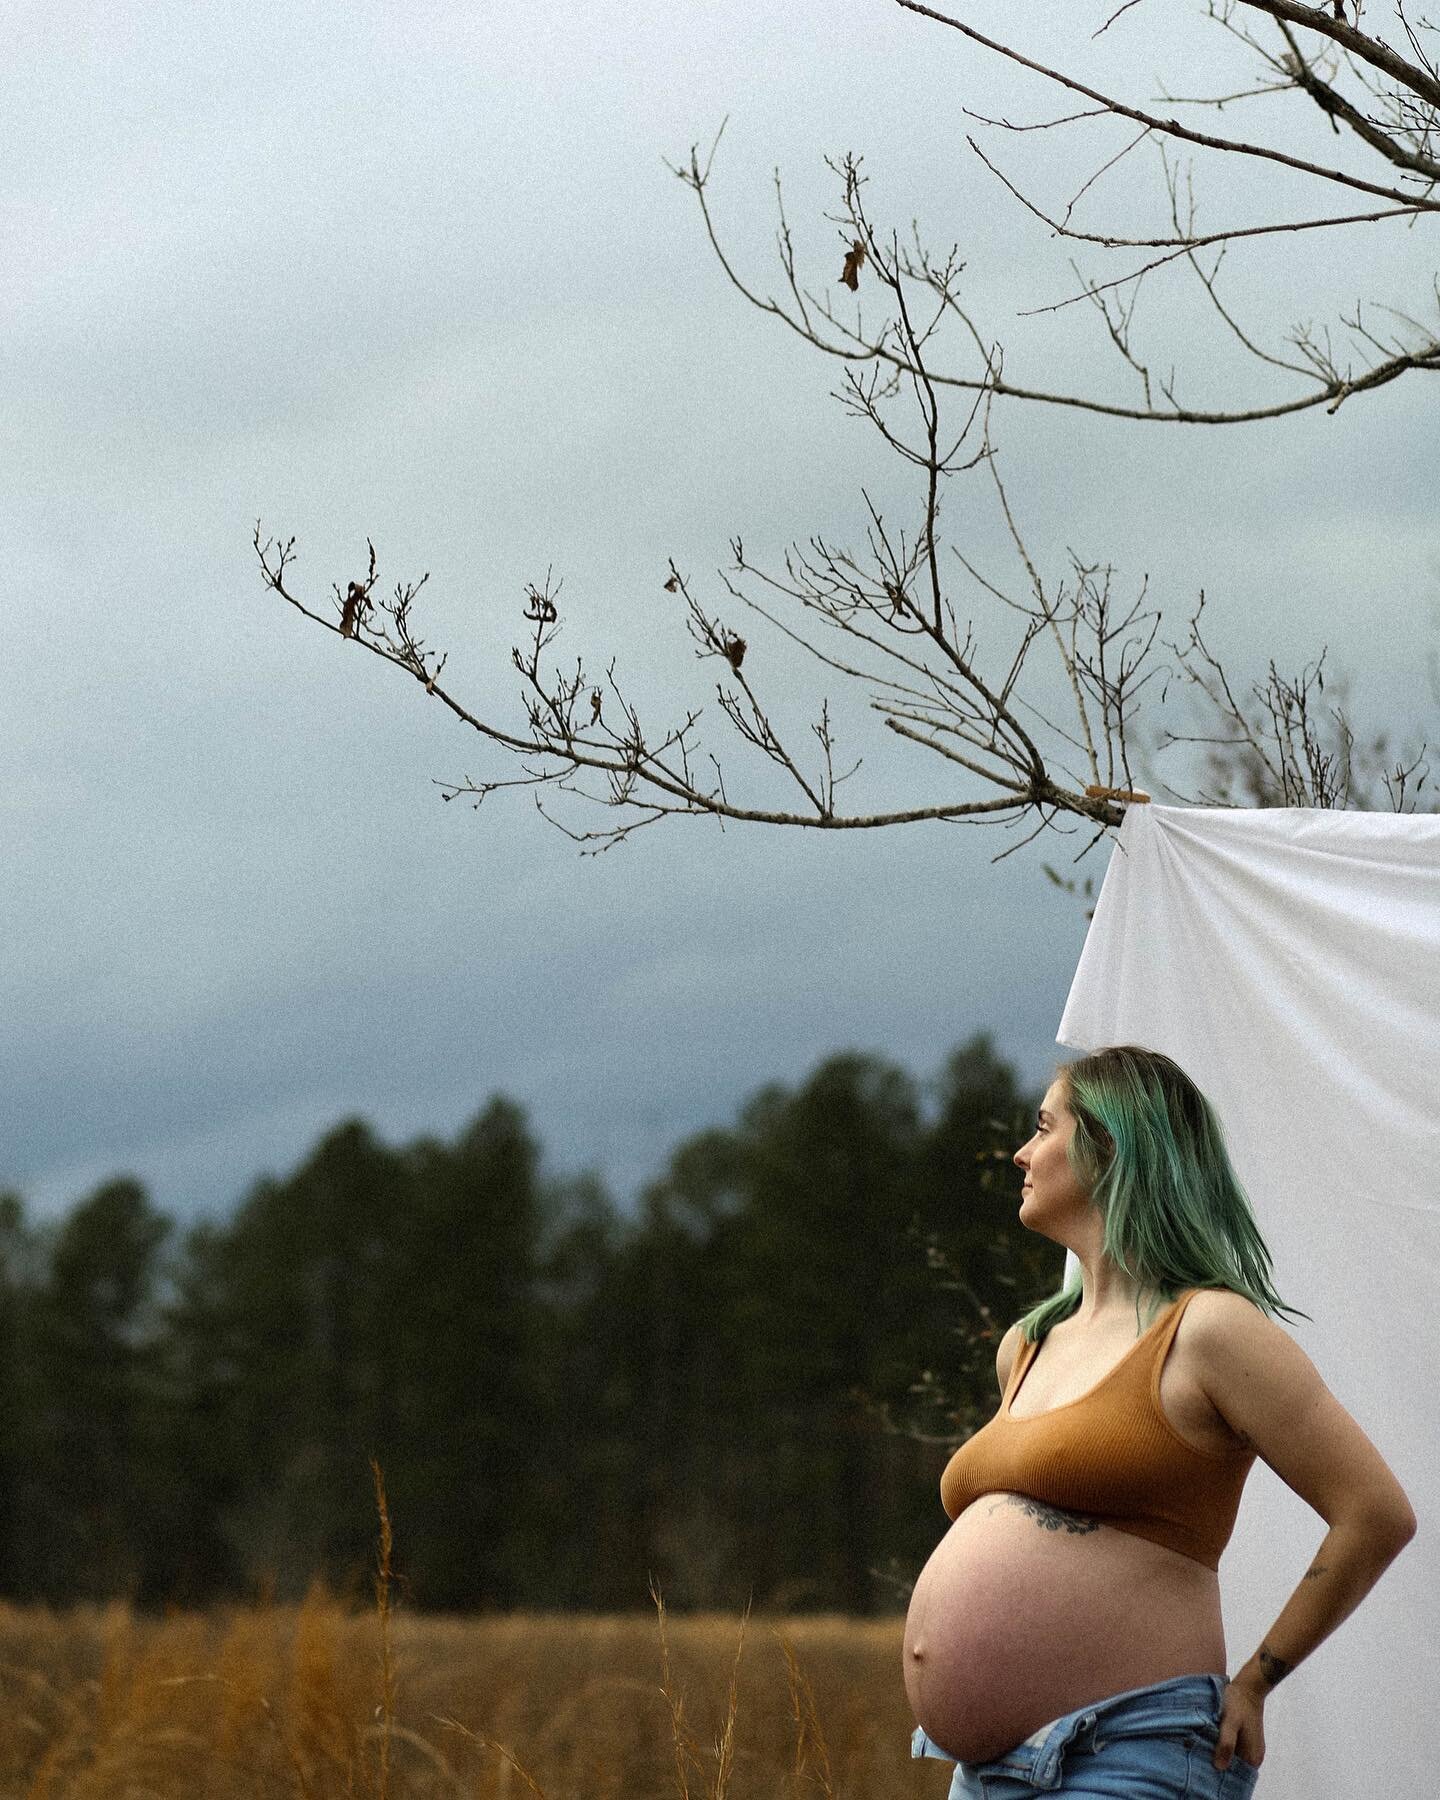 one of the beauties from the shoot with @michaelamckinney16 
⠀⠀⠀⠀⠀⠀⠀⠀⠀
I have absolutely loved working with her through her pregnancy this far and hearing her heart and her stories.